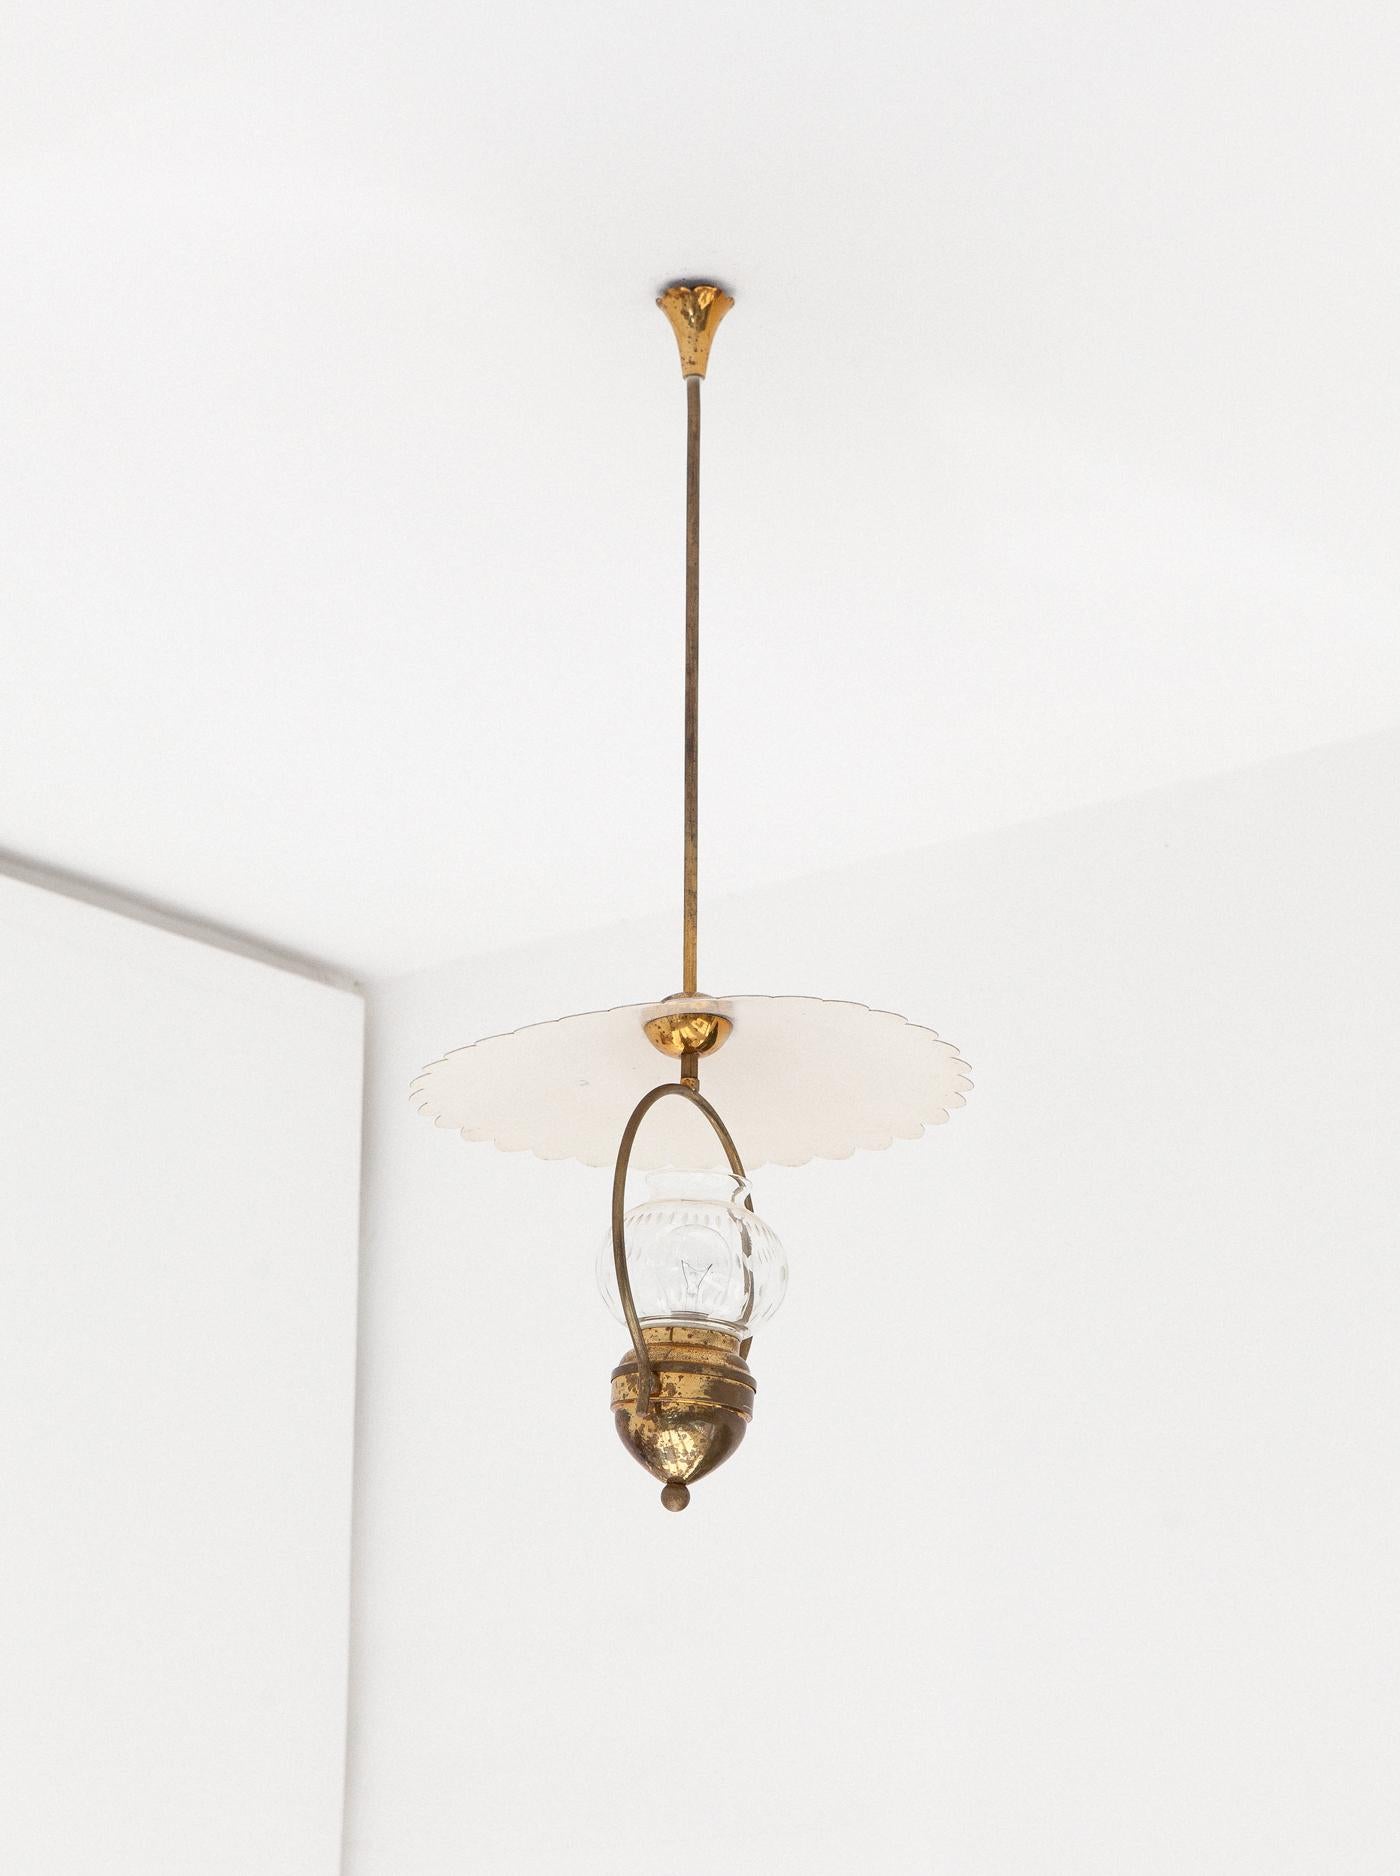 Mid-Century Modern pendant lamp, manufactured in Italy in the 1940s
This ceiling lamp is made of brass frame with its original patina, brass details, glass shade and metal white ivory enameled top.

Original working wire that mount standard E27